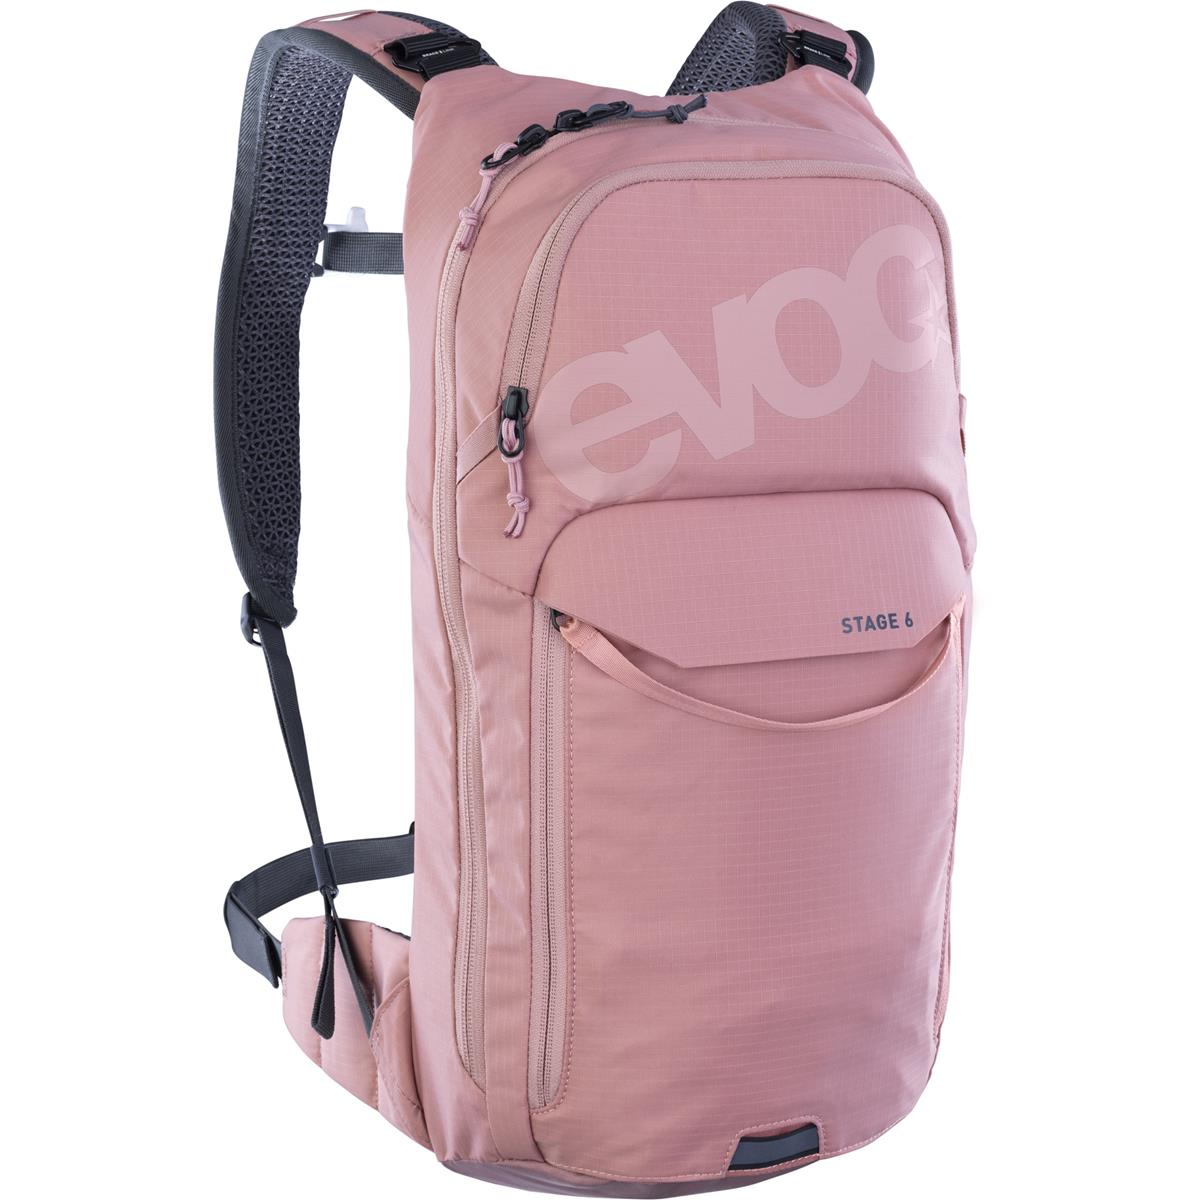 Evoc Backpack Stage 6 Dusty Pink